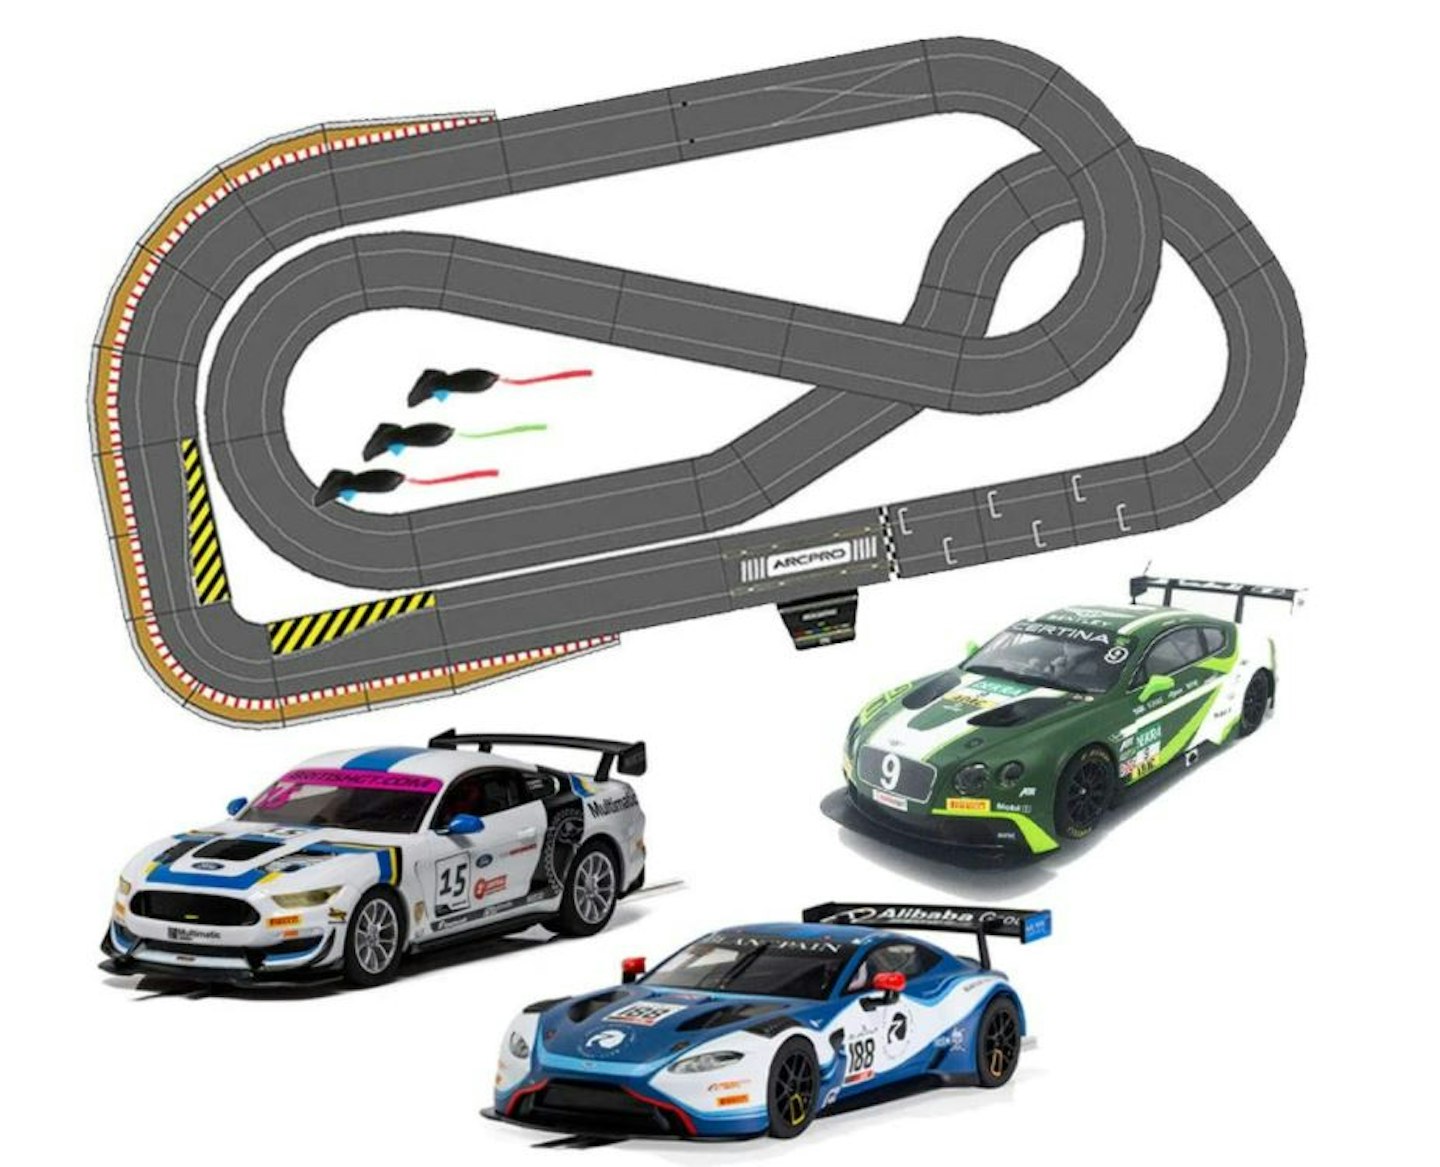 The story of Scalextric: how slot car racing is going digital